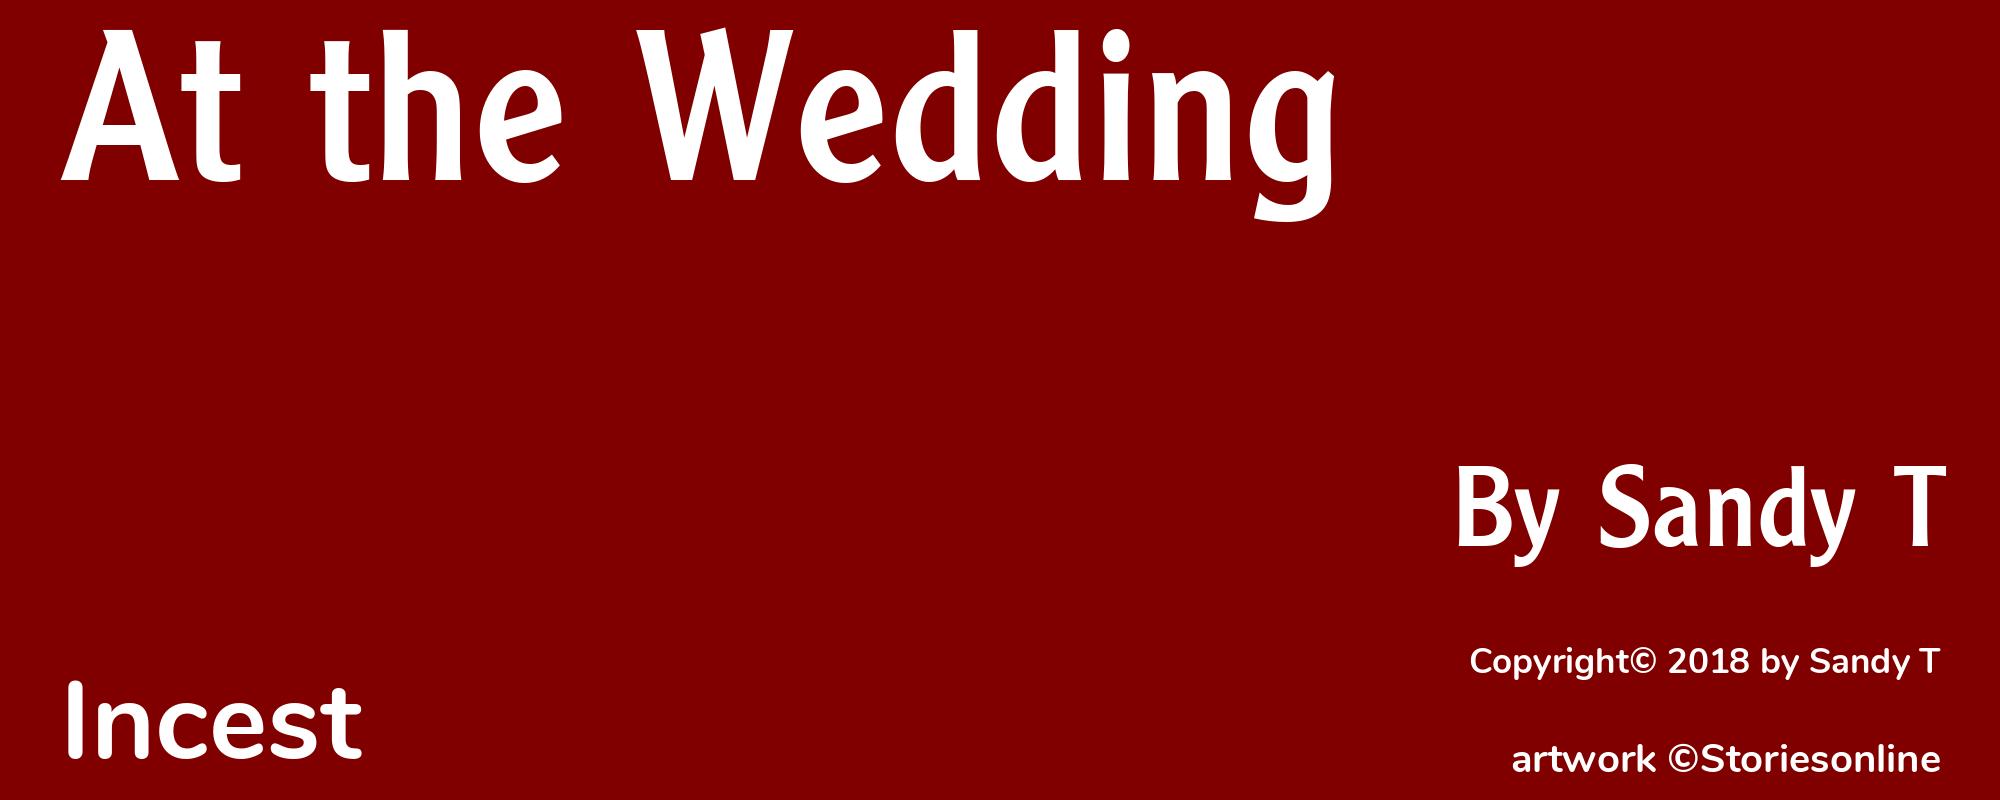 At the Wedding - Cover